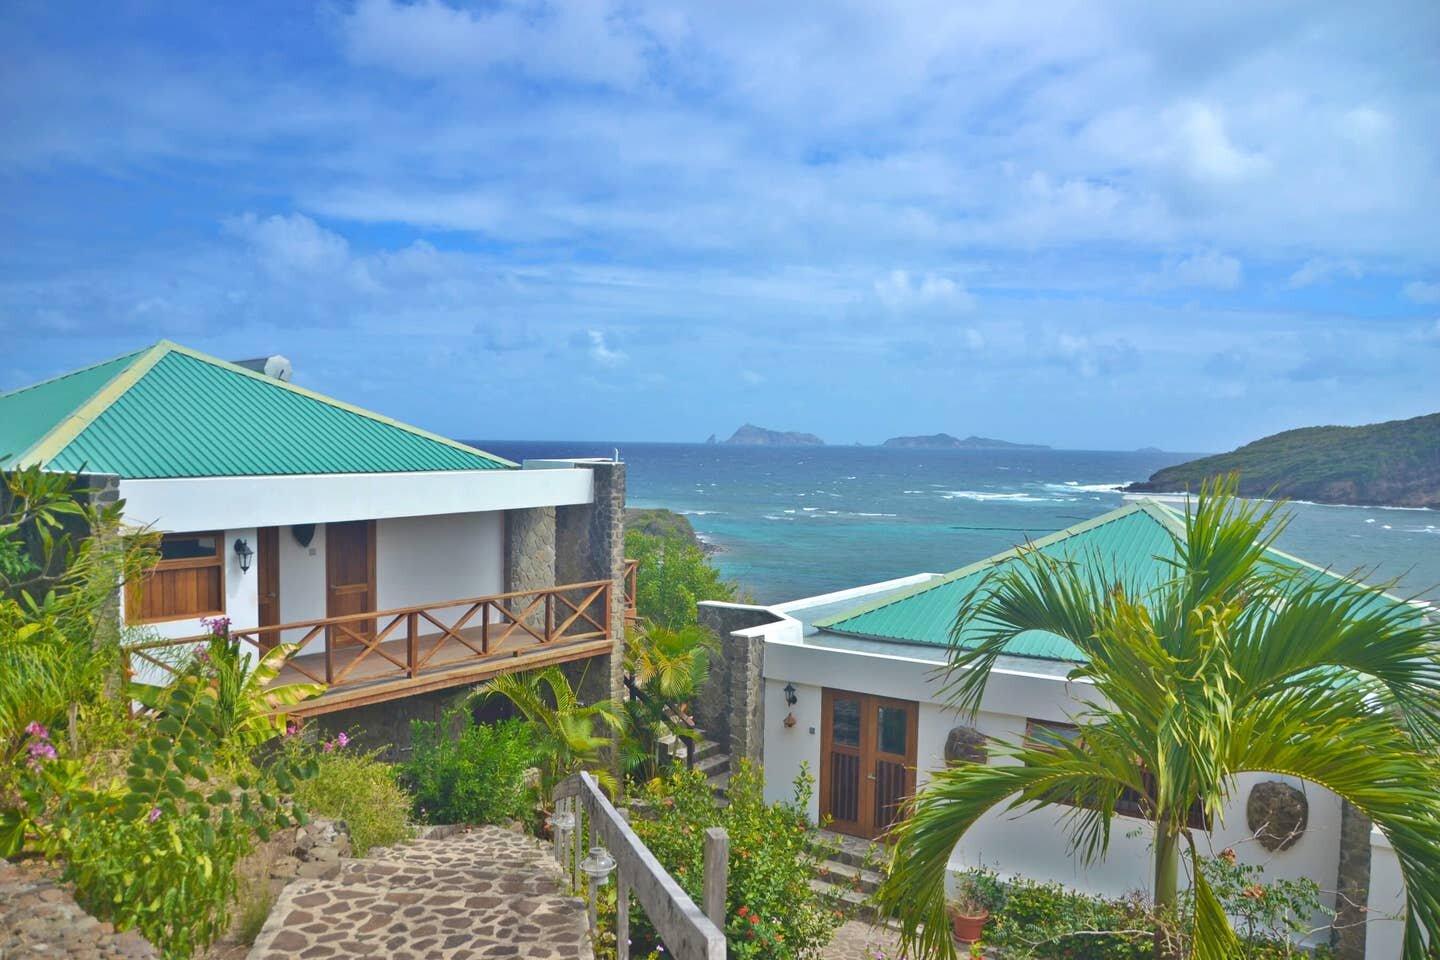 Crown-Point-House-Bequia-view-from-above.jpg